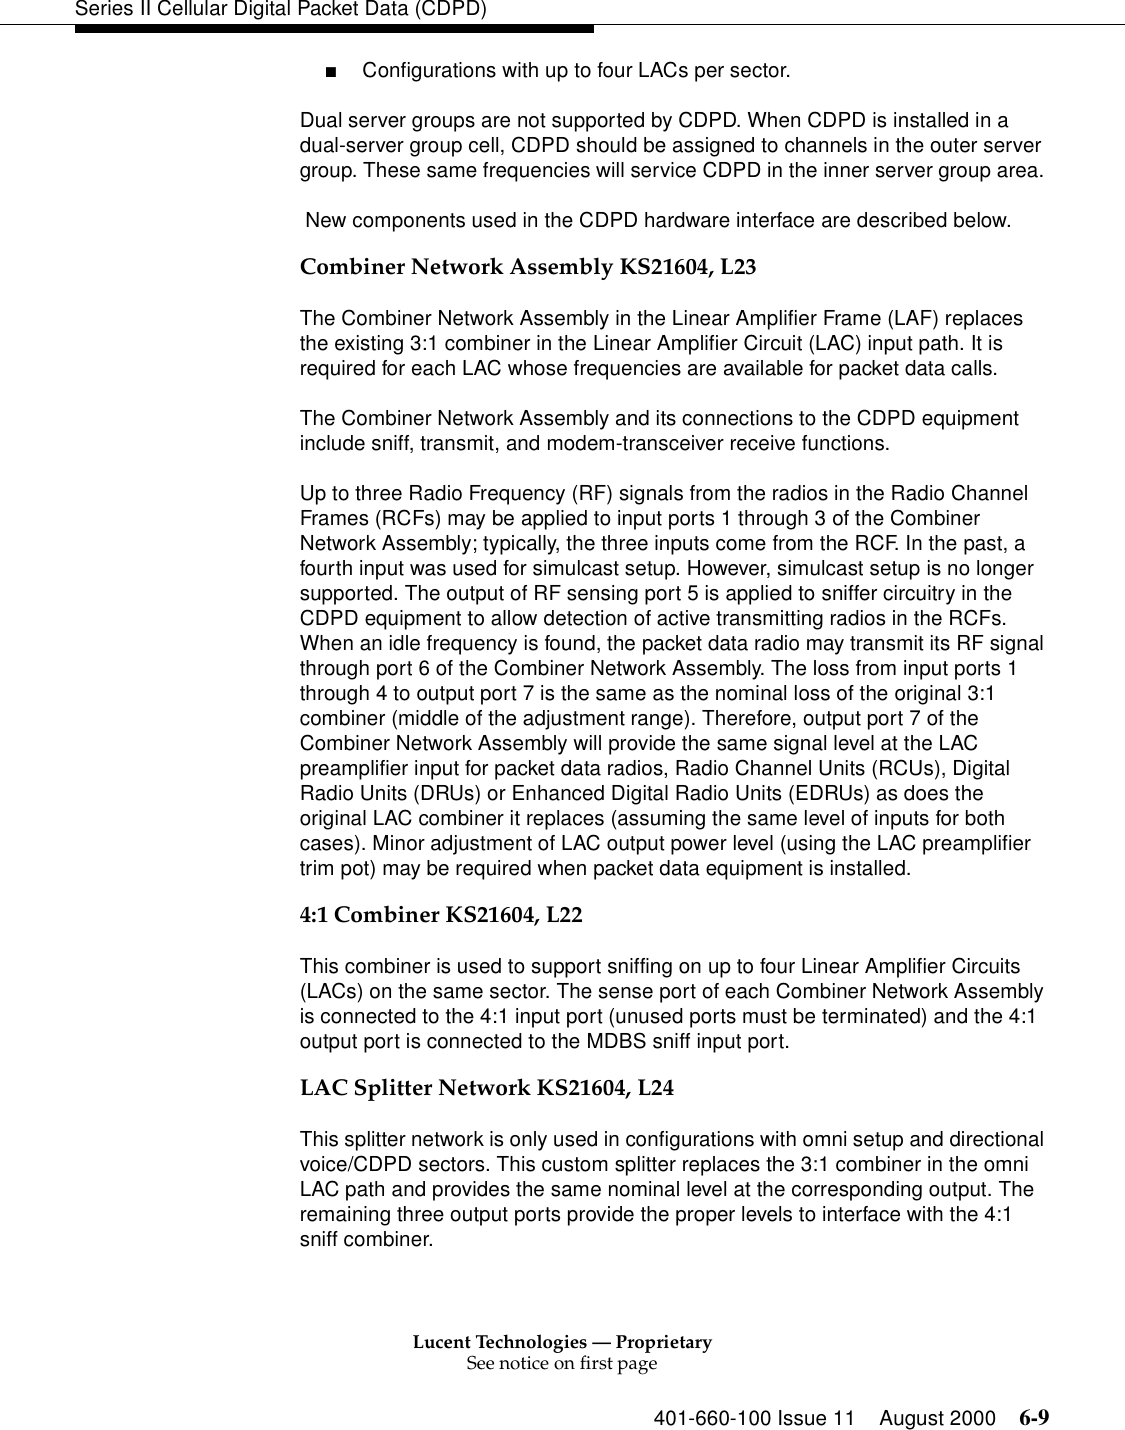 Lucent Technologies — ProprietarySee notice on first page401-660-100 Issue 11 August 2000 6-9Series II Cellular Digital Packet Data (CDPD)■Configurations with up to four LACs per sector. Dual server groups are not supported by CDPD. When CDPD is installed in a dual-server group cell, CDPD should be assigned to channels in the outer server group. These same frequencies will service CDPD in the inner server group area.  New components used in the CDPD hardware interface are described below. Combiner Network Assembly KS21604, L23The Combiner Network Assembly in the Linear Amplifier Frame (LAF) replaces the existing 3:1 combiner in the Linear Amplifier Circuit (LAC) input path. It is required for each LAC whose frequencies are available for packet data calls. The Combiner Network Assembly and its connections to the CDPD equipment include sniff, transmit, and modem-transceiver receive functions.Up to three Radio Frequency (RF) signals from the radios in the Radio Channel Frames (RCFs) may be applied to input ports 1 through 3 of the Combiner Network Assembly; typically, the three inputs come from the RCF. In the past, a fourth input was used for simulcast setup. However, simulcast setup is no longer supported. The output of RF sensing port 5 is applied to sniffer circuitry in the CDPD equipment to allow detection of active transmitting radios in the RCFs. When an idle frequency is found, the packet data radio may transmit its RF signal through port 6 of the Combiner Network Assembly. The loss from input ports 1 through 4 to output port 7 is the same as the nominal loss of the original 3:1 combiner (middle of the adjustment range). Therefore, output port 7 of the Combiner Network Assembly will provide the same signal level at the LAC preamplifier input for packet data radios, Radio Channel Units (RCUs), Digital Radio Units (DRUs) or Enhanced Digital Radio Units (EDRUs) as does the original LAC combiner it replaces (assuming the same level of inputs for both cases). Minor adjustment of LAC output power level (using the LAC preamplifier trim pot) may be required when packet data equipment is installed. 4:1 Combiner KS21604, L22This combiner is used to support sniffing on up to four Linear Amplifier Circuits (LACs) on the same sector. The sense port of each Combiner Network Assembly is connected to the 4:1 input port (unused ports must be terminated) and the 4:1 output port is connected to the MDBS sniff input port. LAC Splitter Network KS21604, L24This splitter network is only used in configurations with omni setup and directional voice/CDPD sectors. This custom splitter replaces the 3:1 combiner in the omni LAC path and provides the same nominal level at the corresponding output. The remaining three output ports provide the proper levels to interface with the 4:1 sniff combiner. 